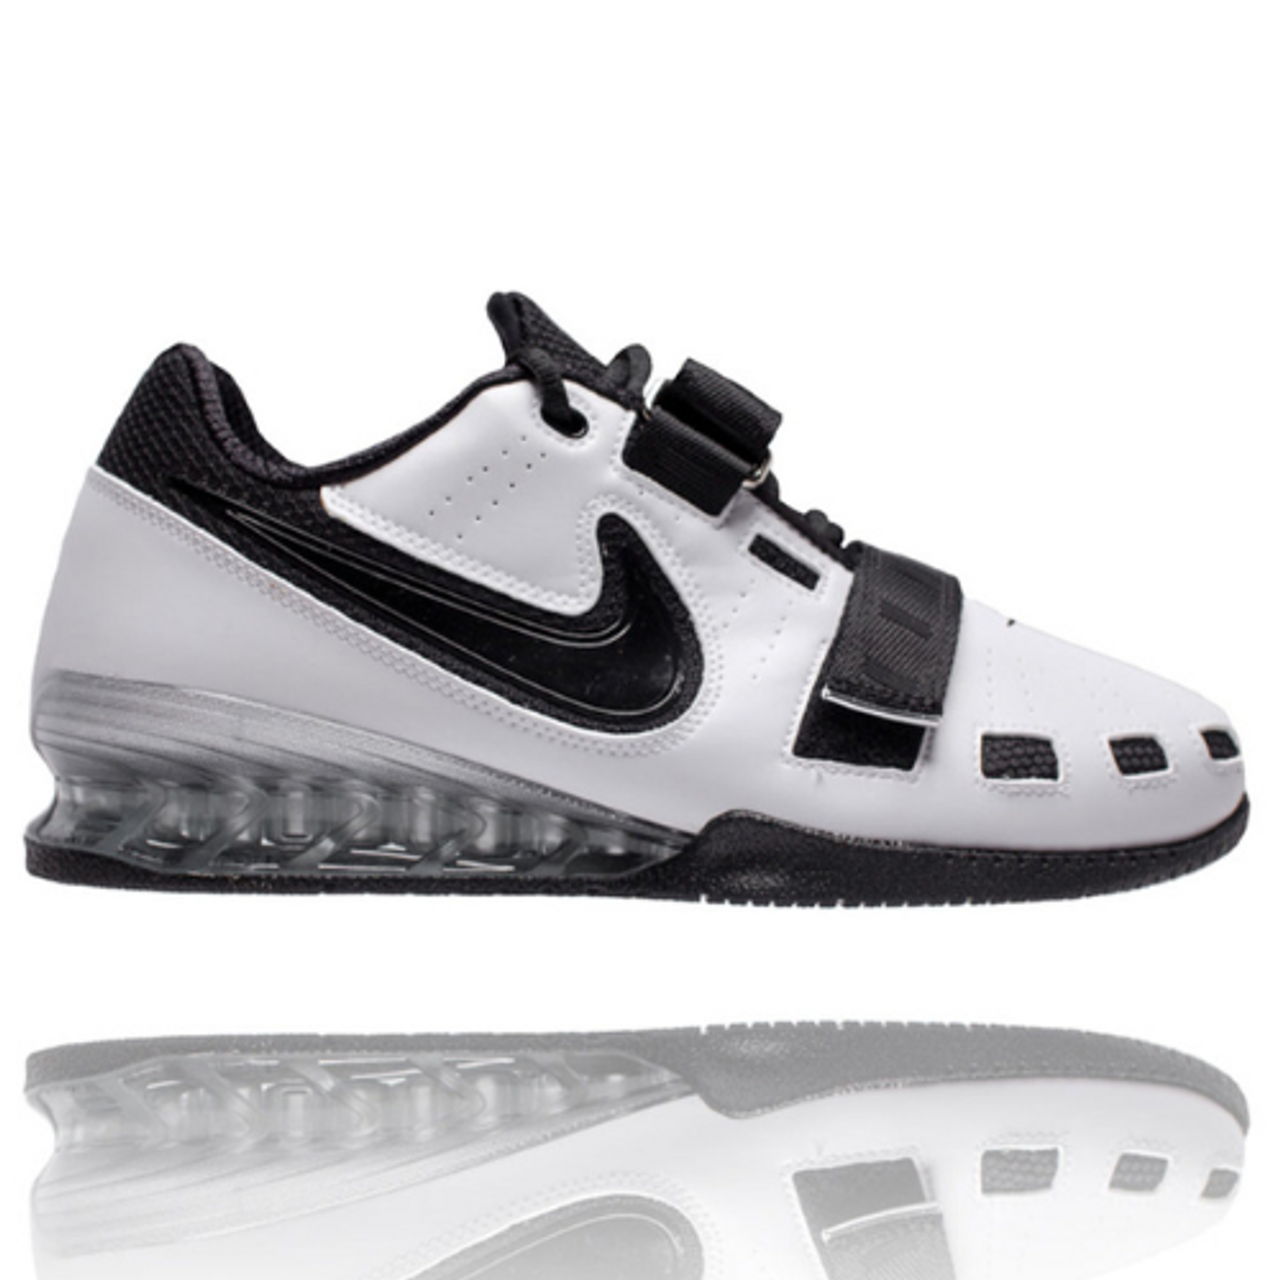 Nike 2 Weightlifting Shoes